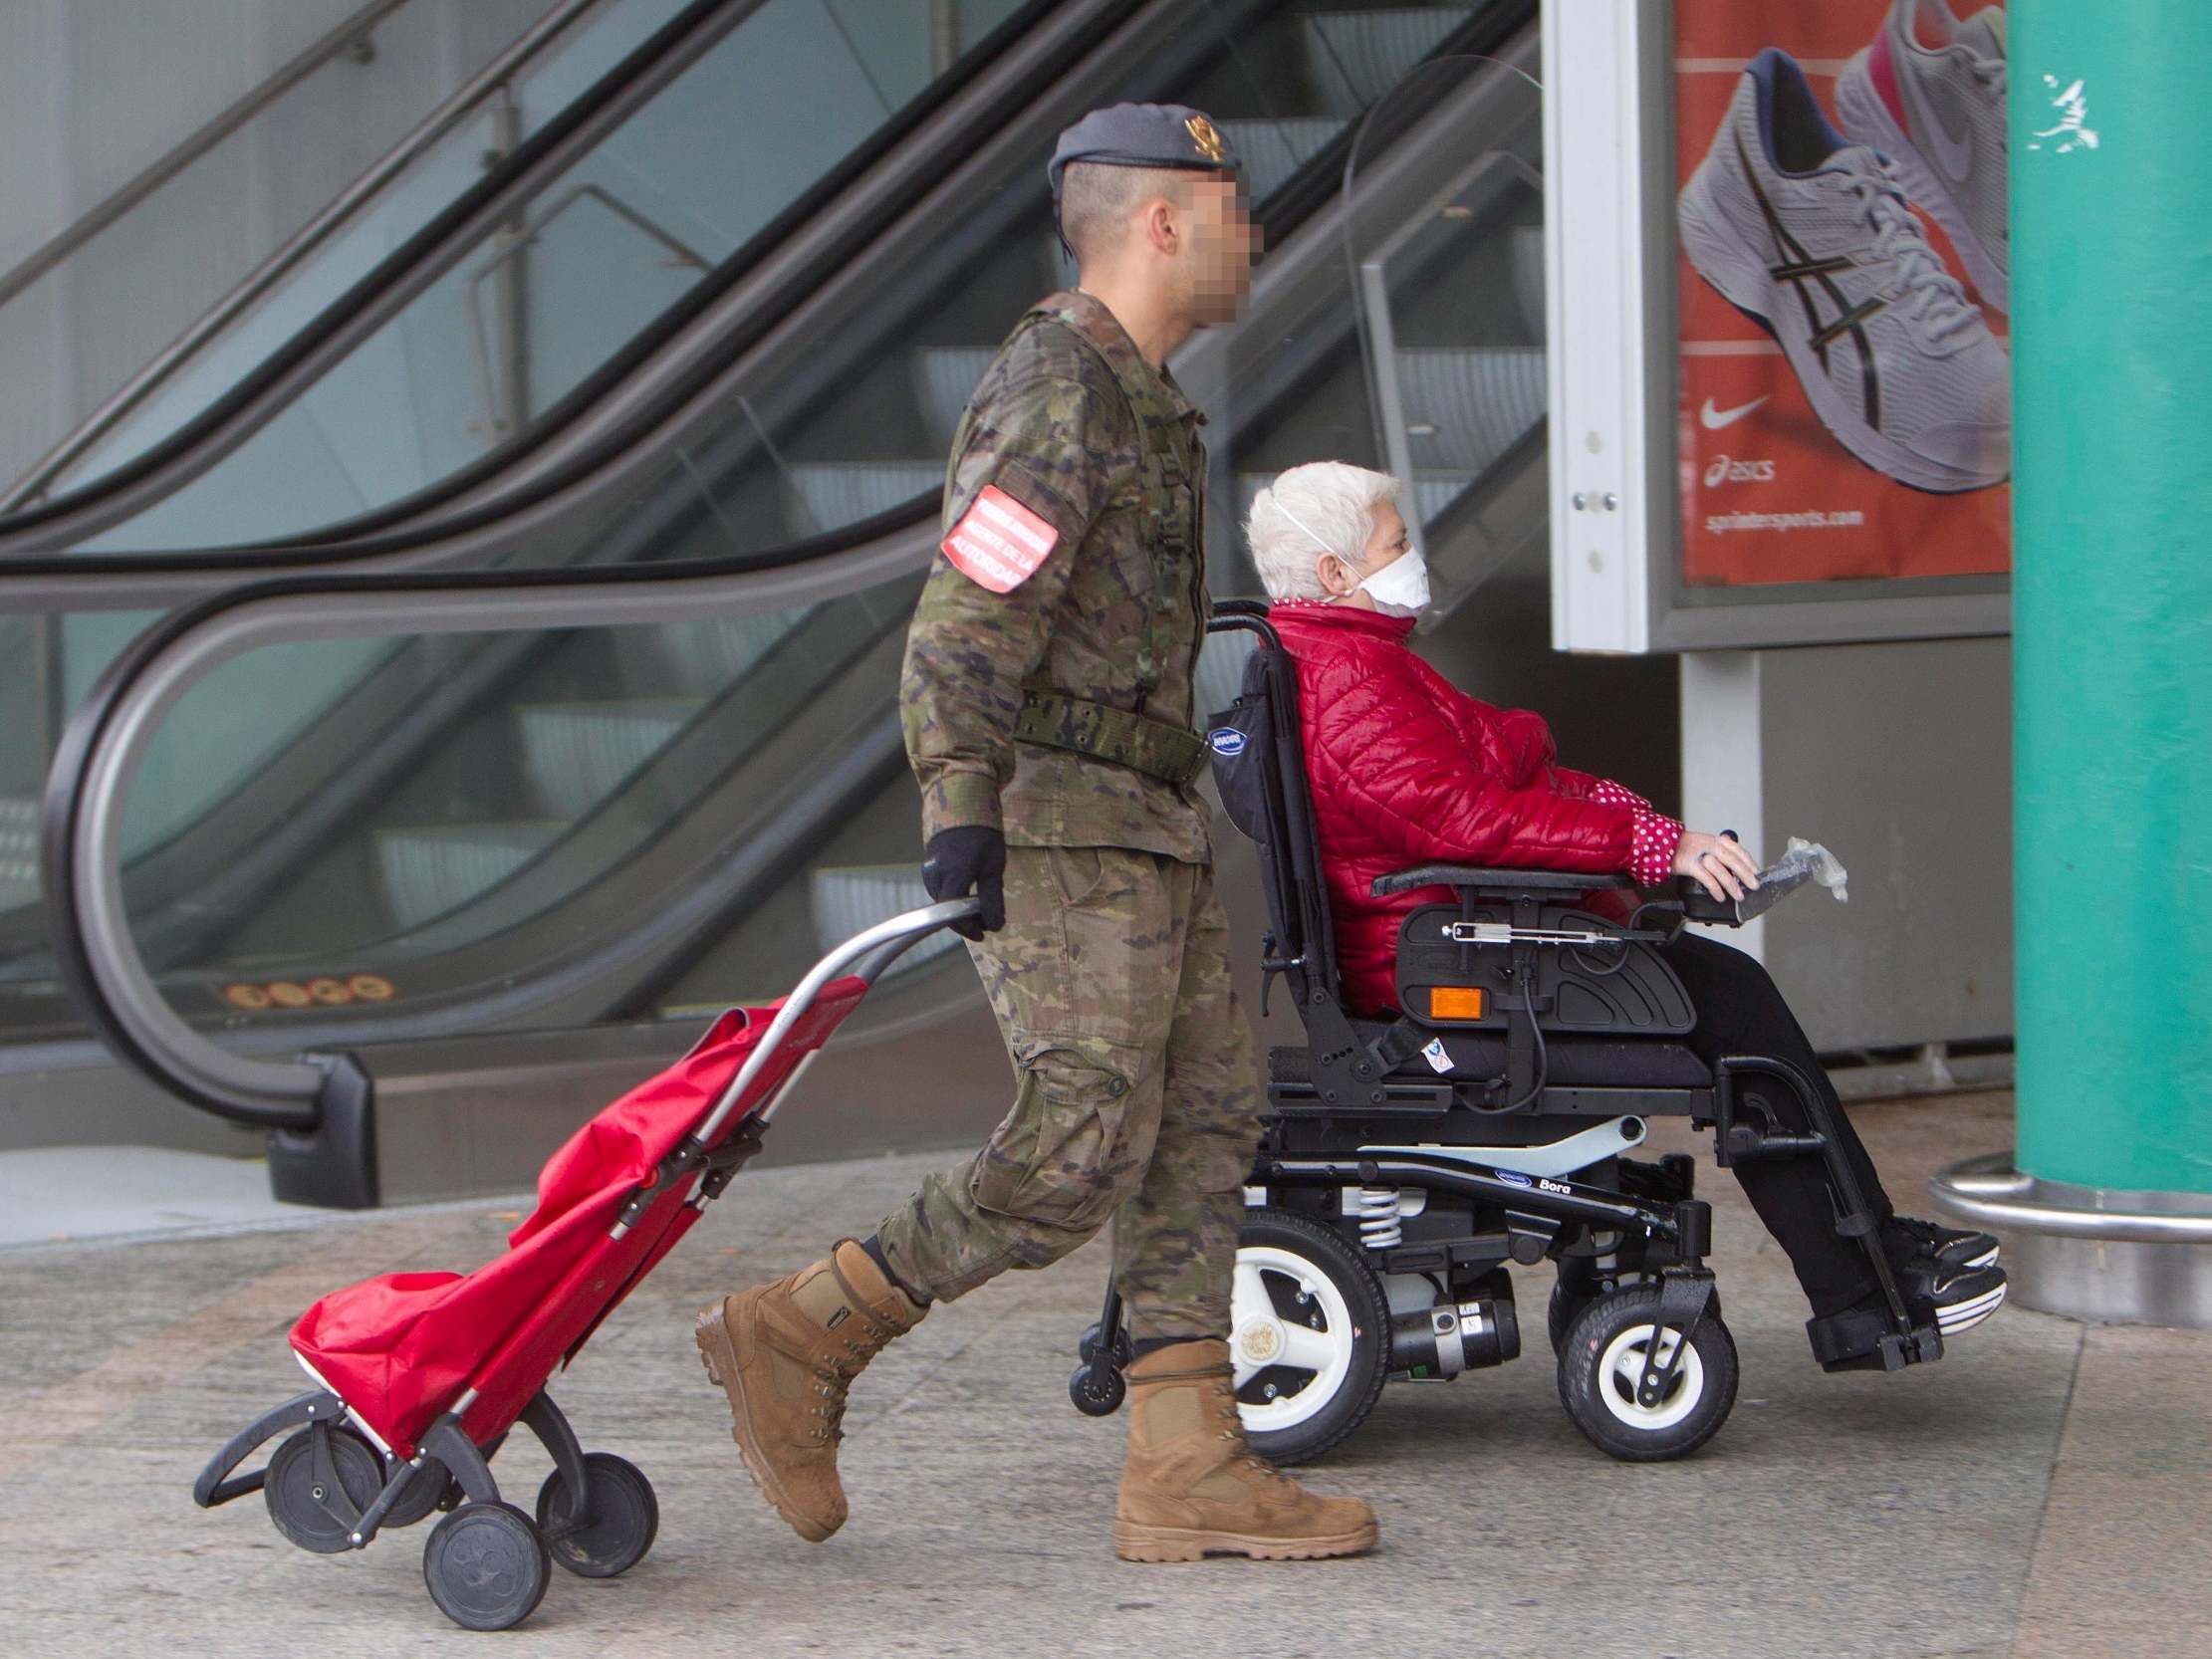 A Spanish soldier helps a disabled woman with her shopping at a supermarket in Vigo, northwestern Spain